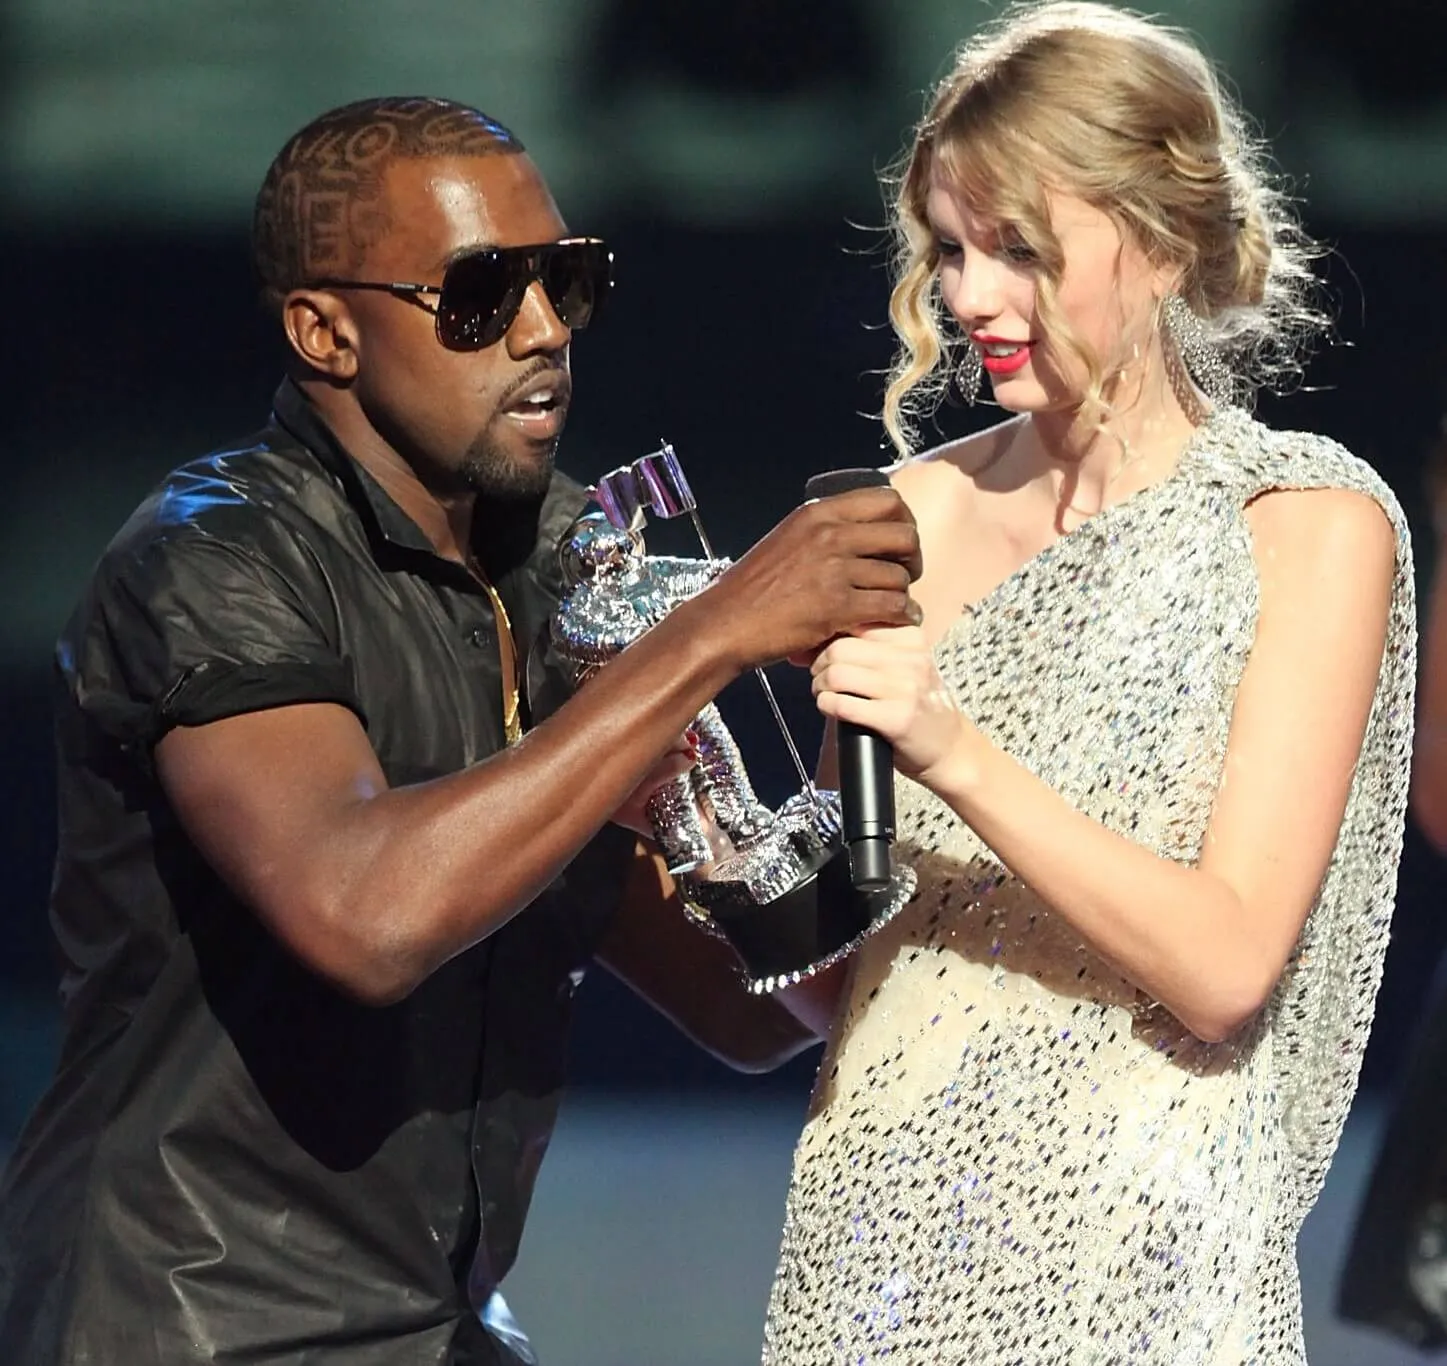 Kanye West standing next to Taylor Swift